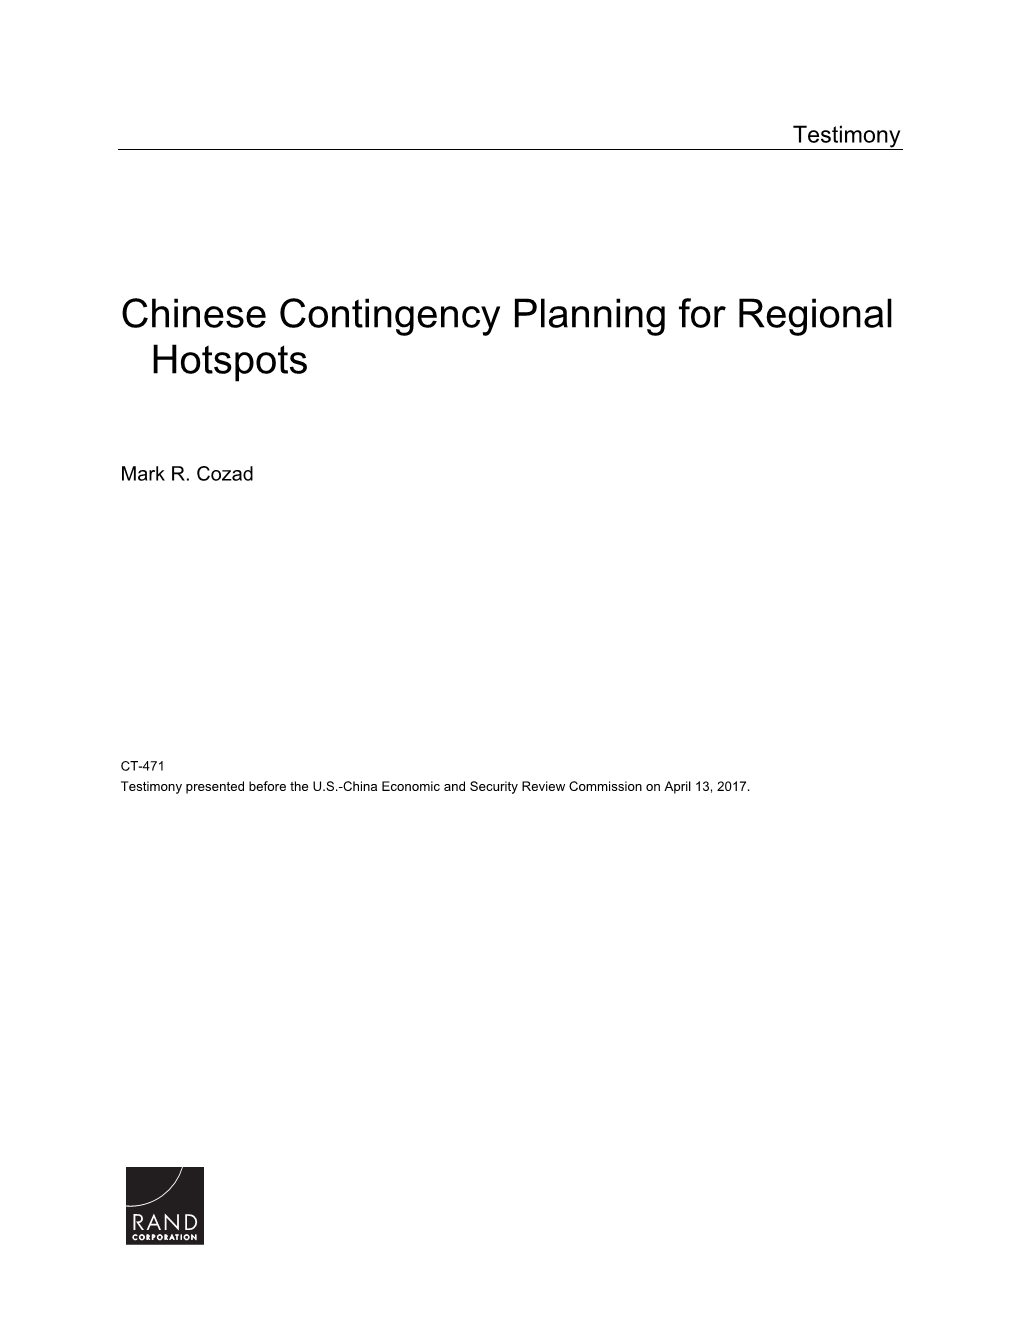 Chinese Contingency Planning for Regional Hotspots